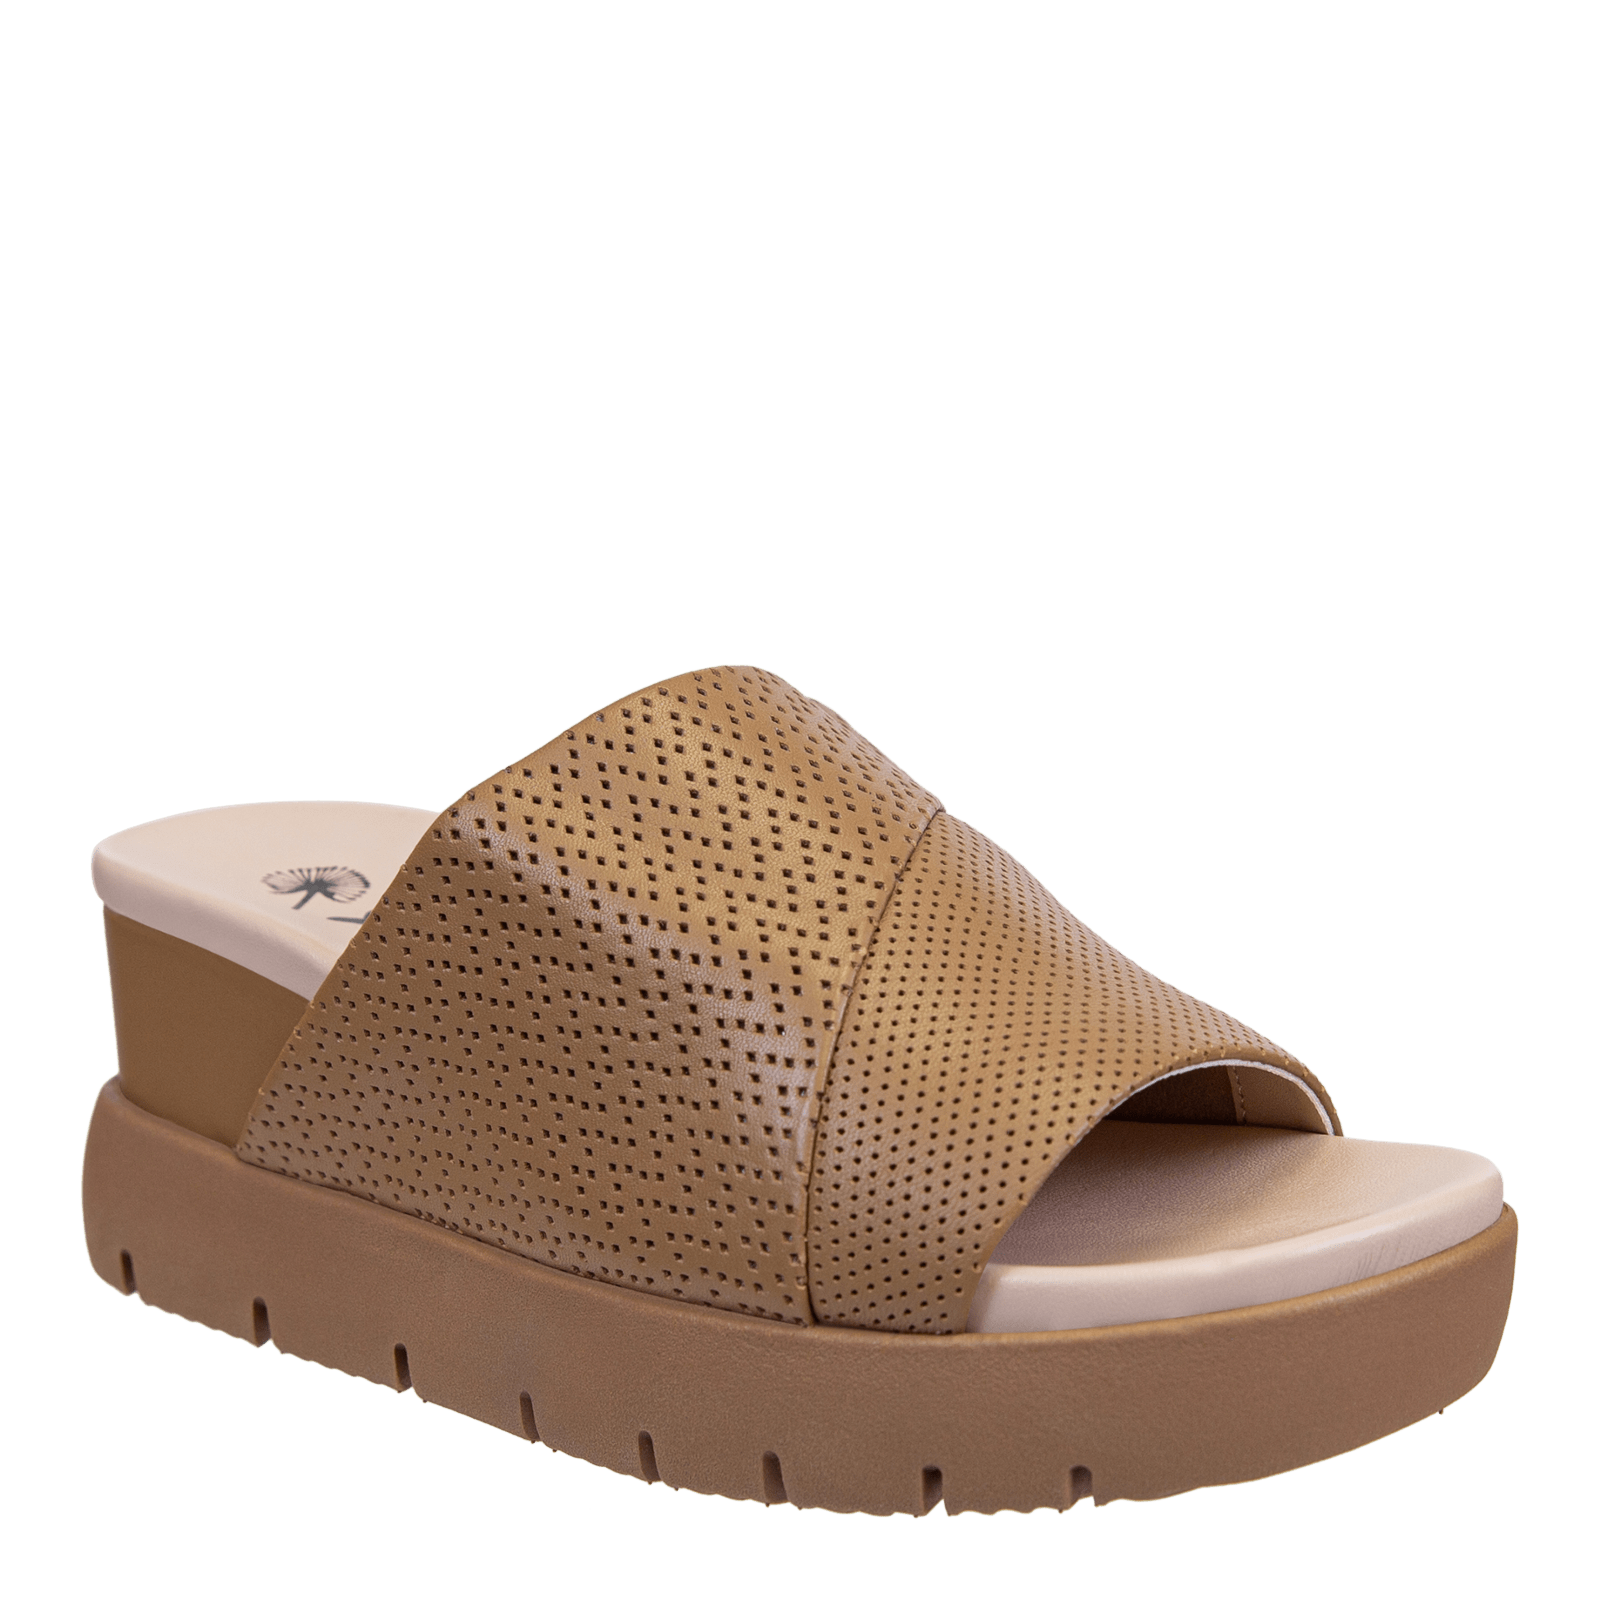 NORM in BROWN Wedge Sandals